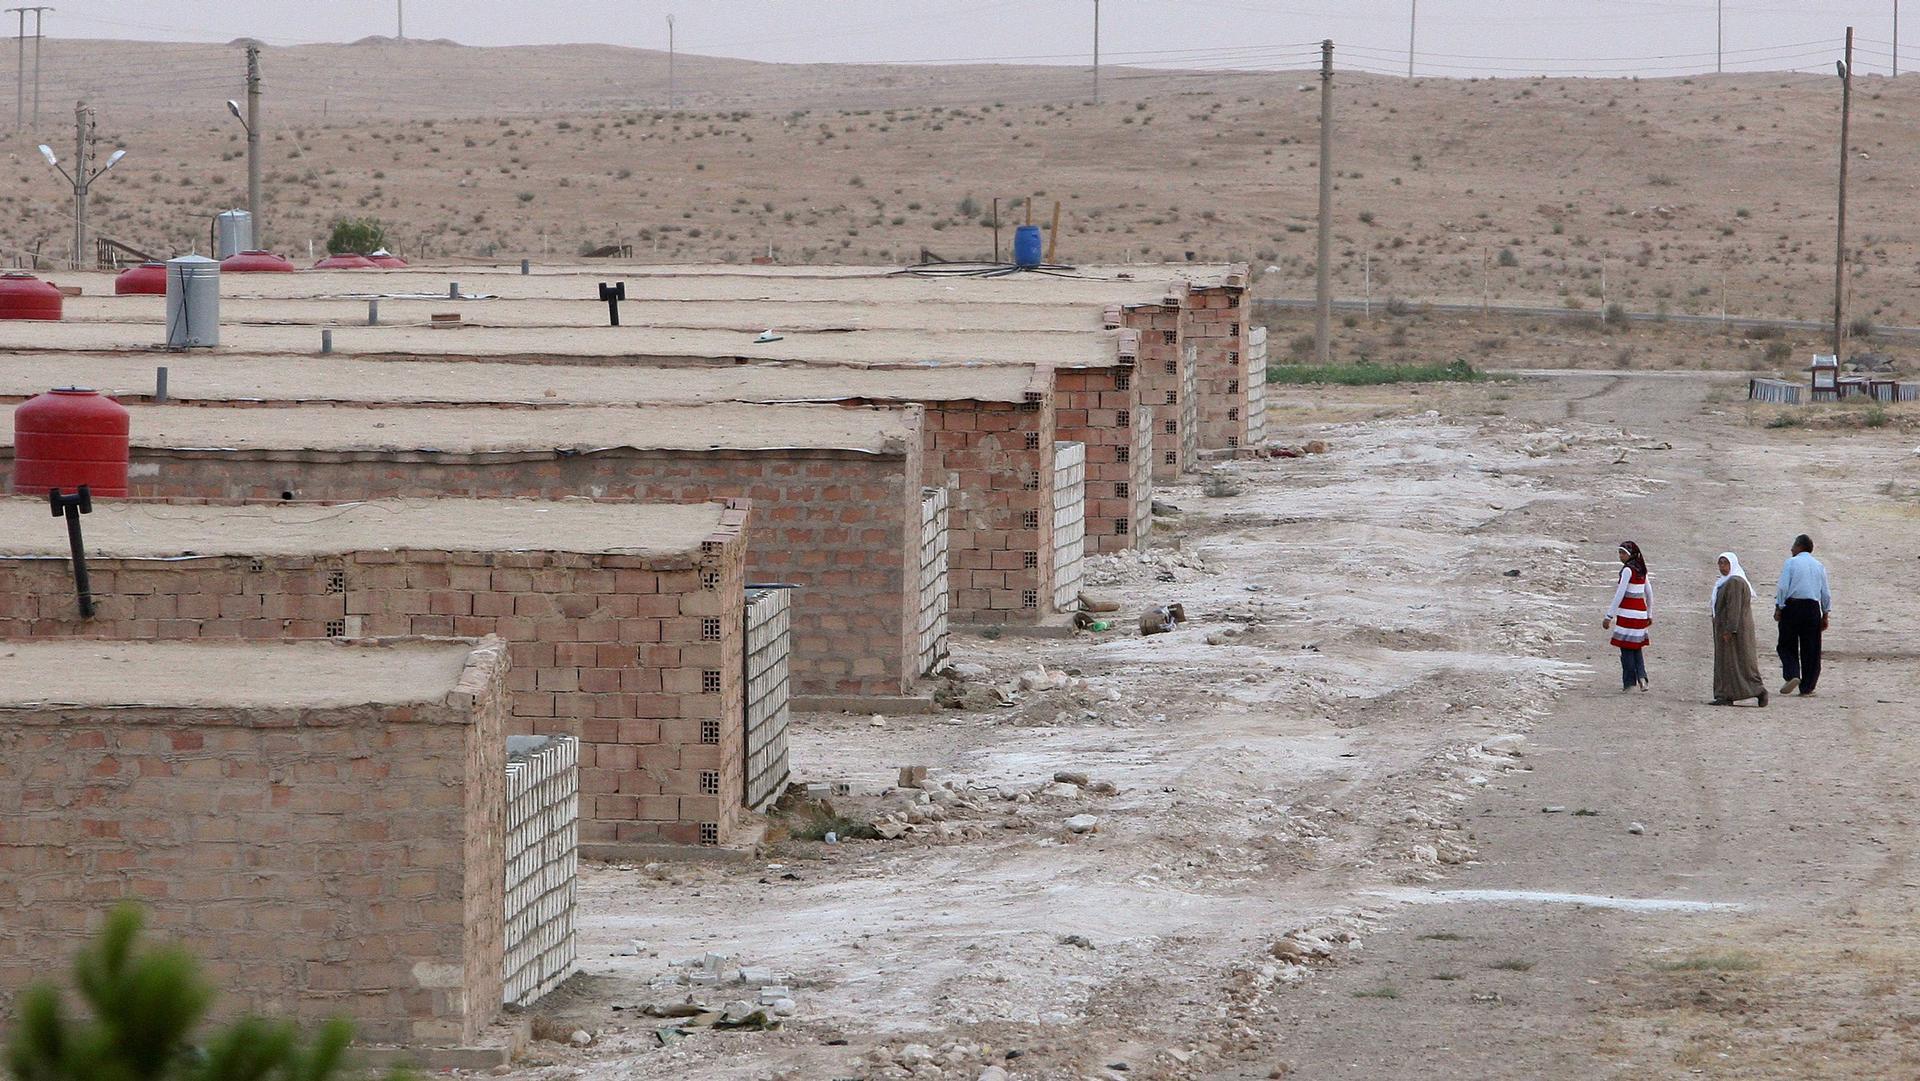 A row of brick shelters are shown amidst a sandy desert location with three people walking in the distance.